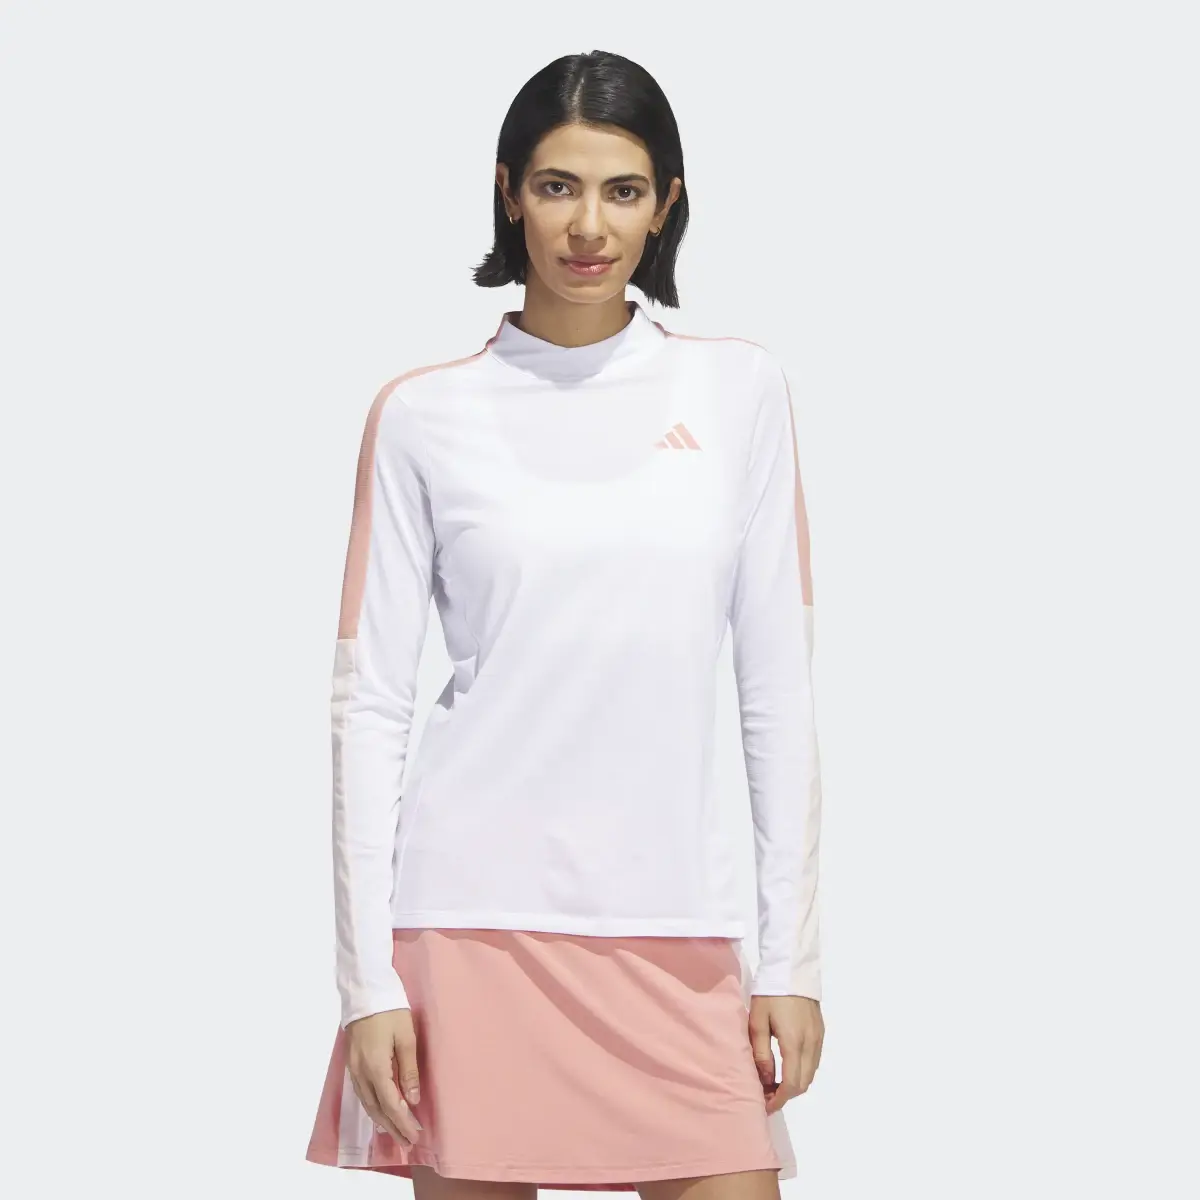 Adidas Made With Nature Mock Neck Long-Sleeve Top. 2